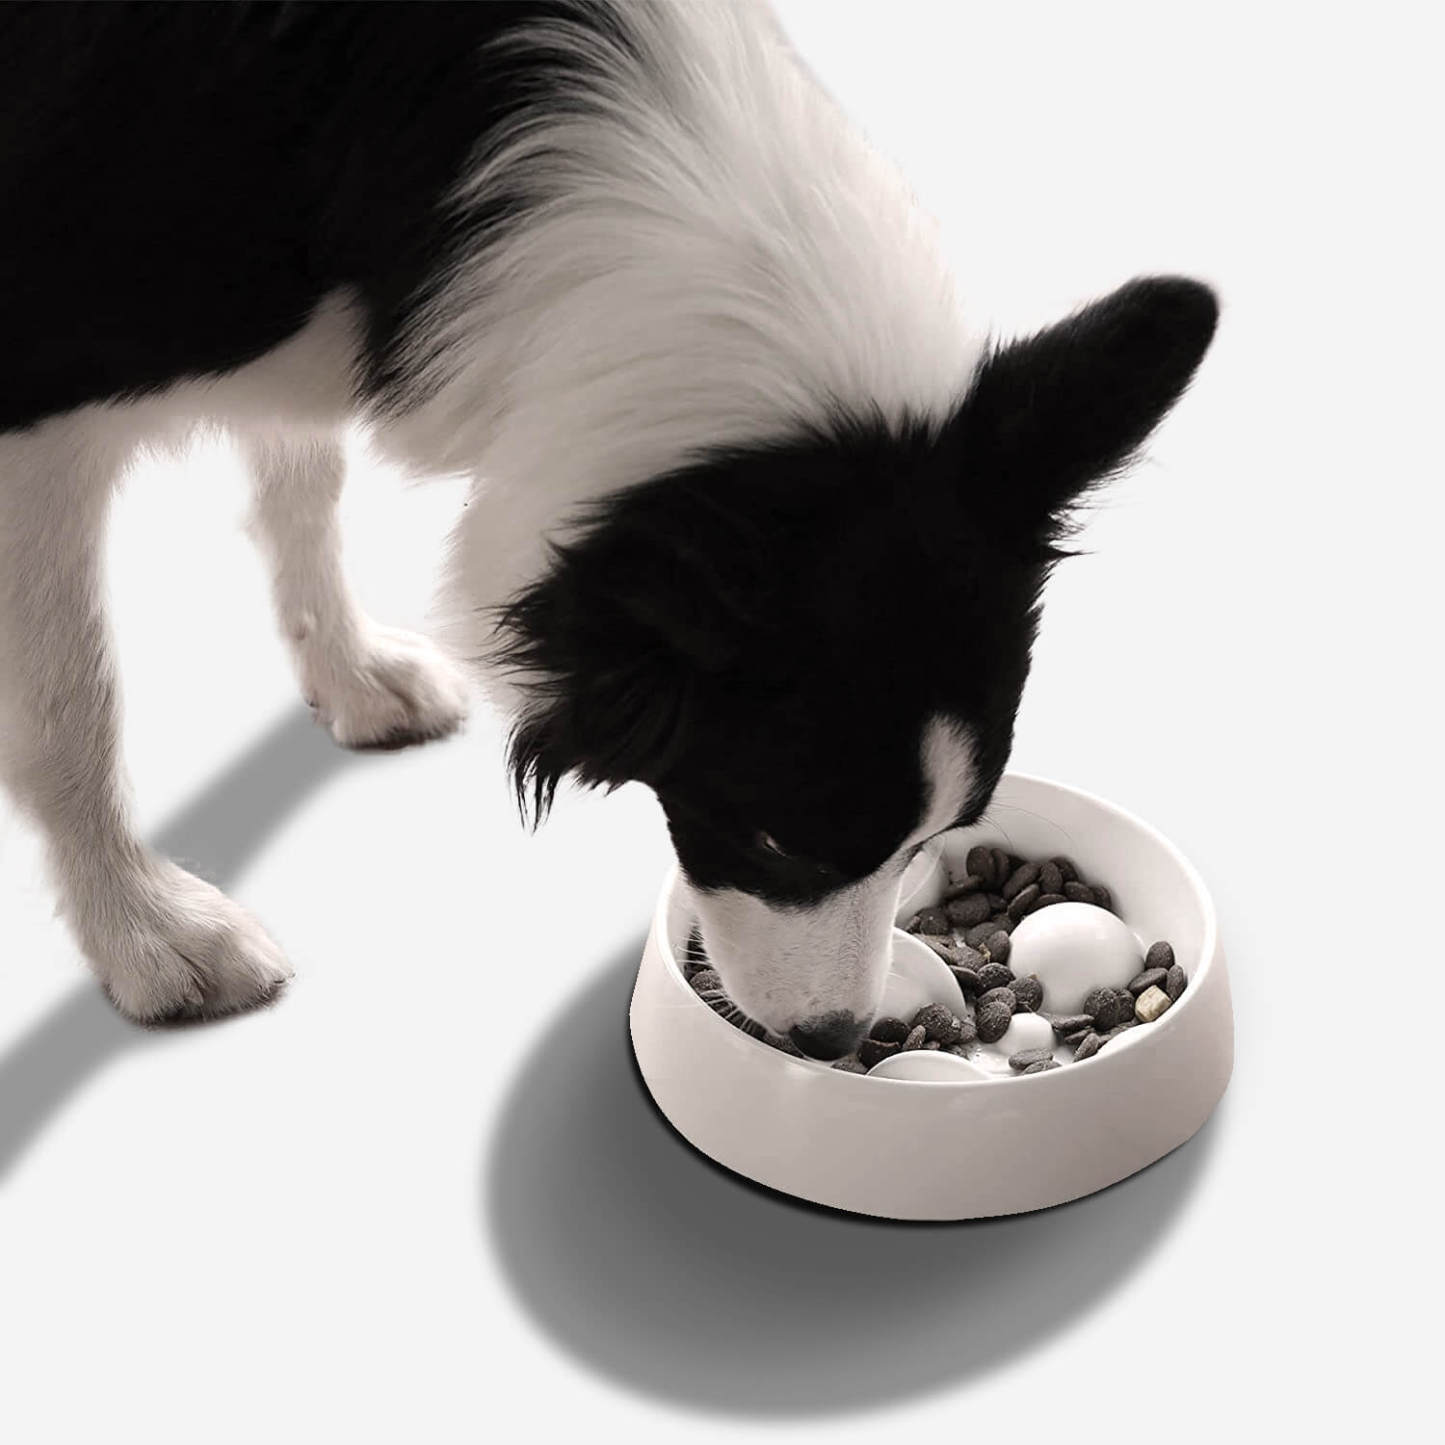 A dog eating food from a white cosmos dog slow feeder bowl